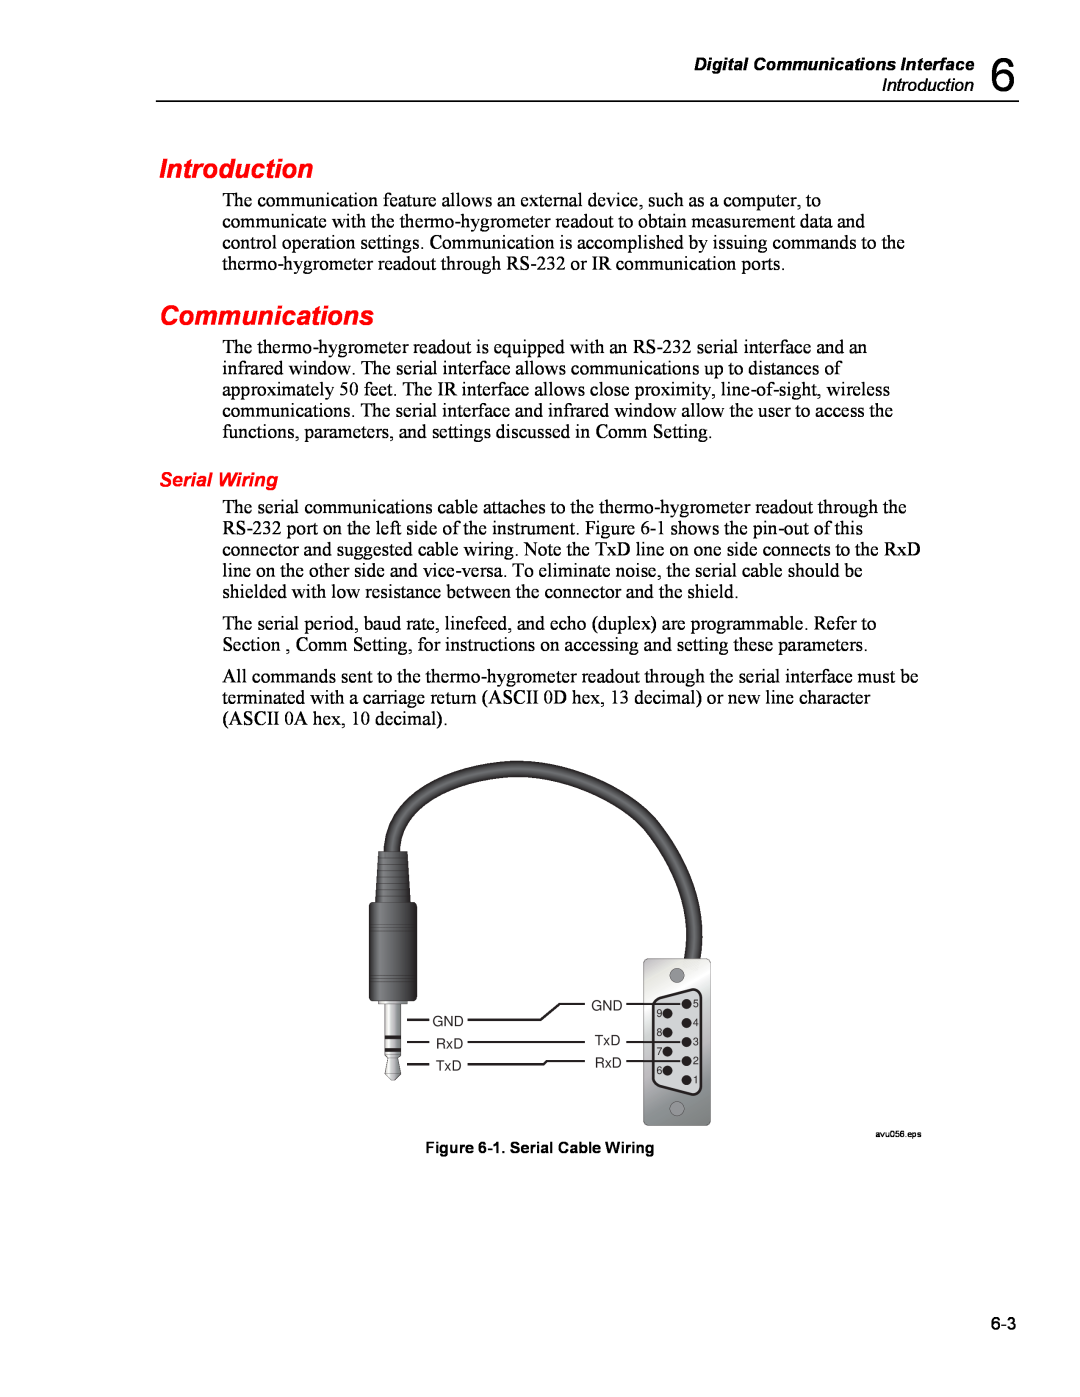 Fluke 5020A user manual Introduction, Serial Wiring, Digital Communications Interface 